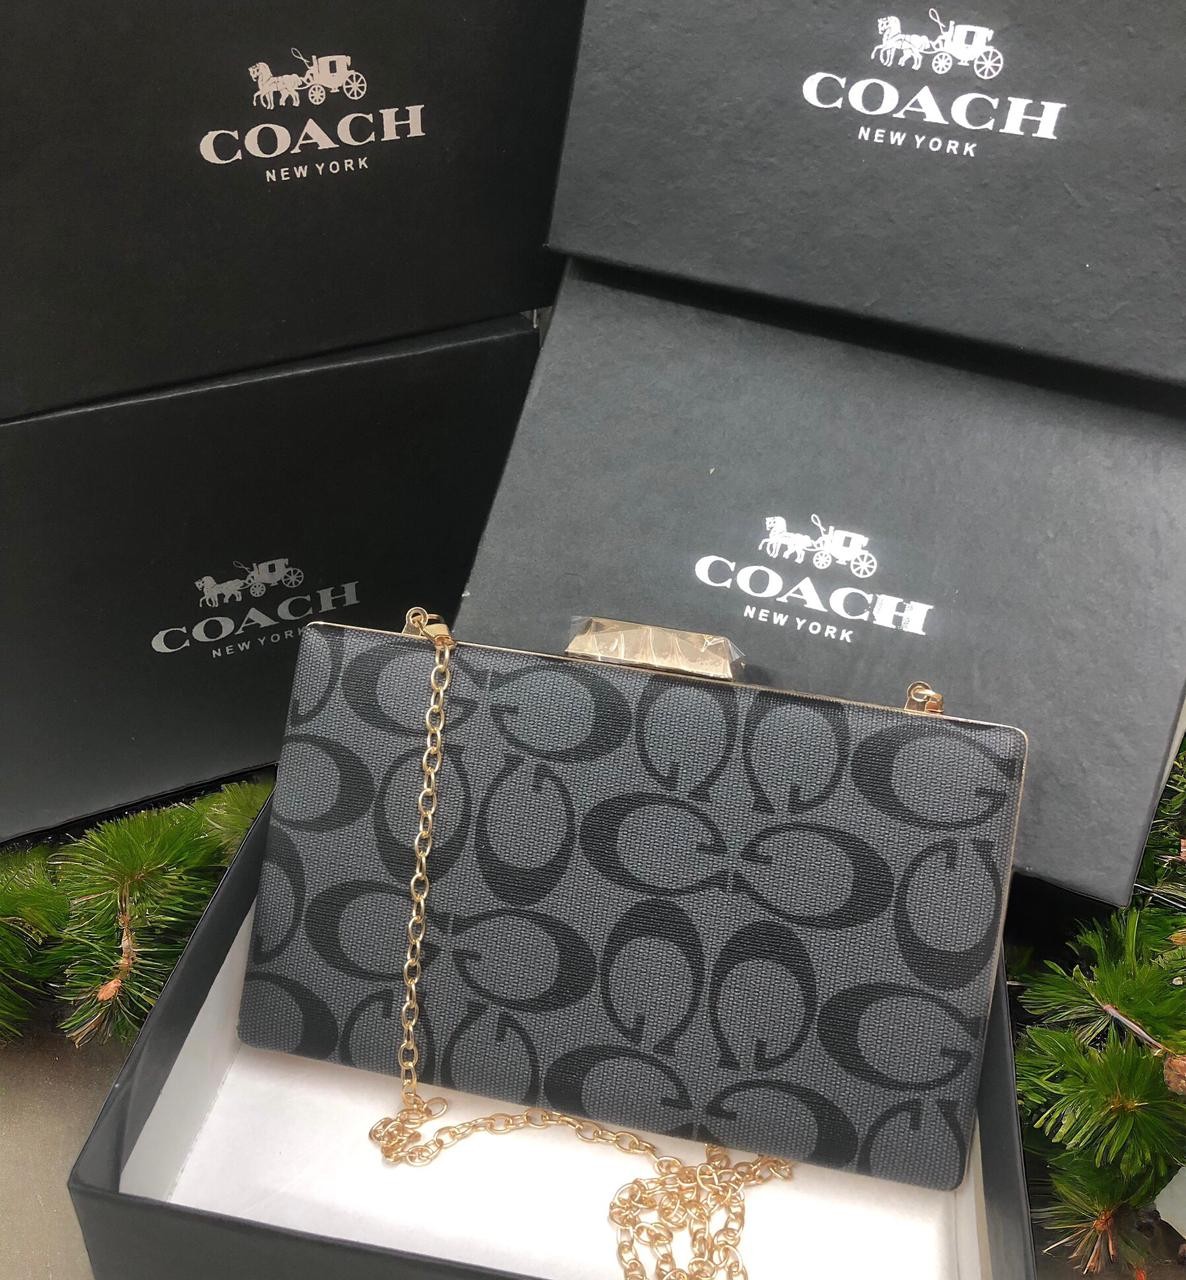 COACH Fancy party Hand Box Clutch Purse Sling and Handle for Girls Bag